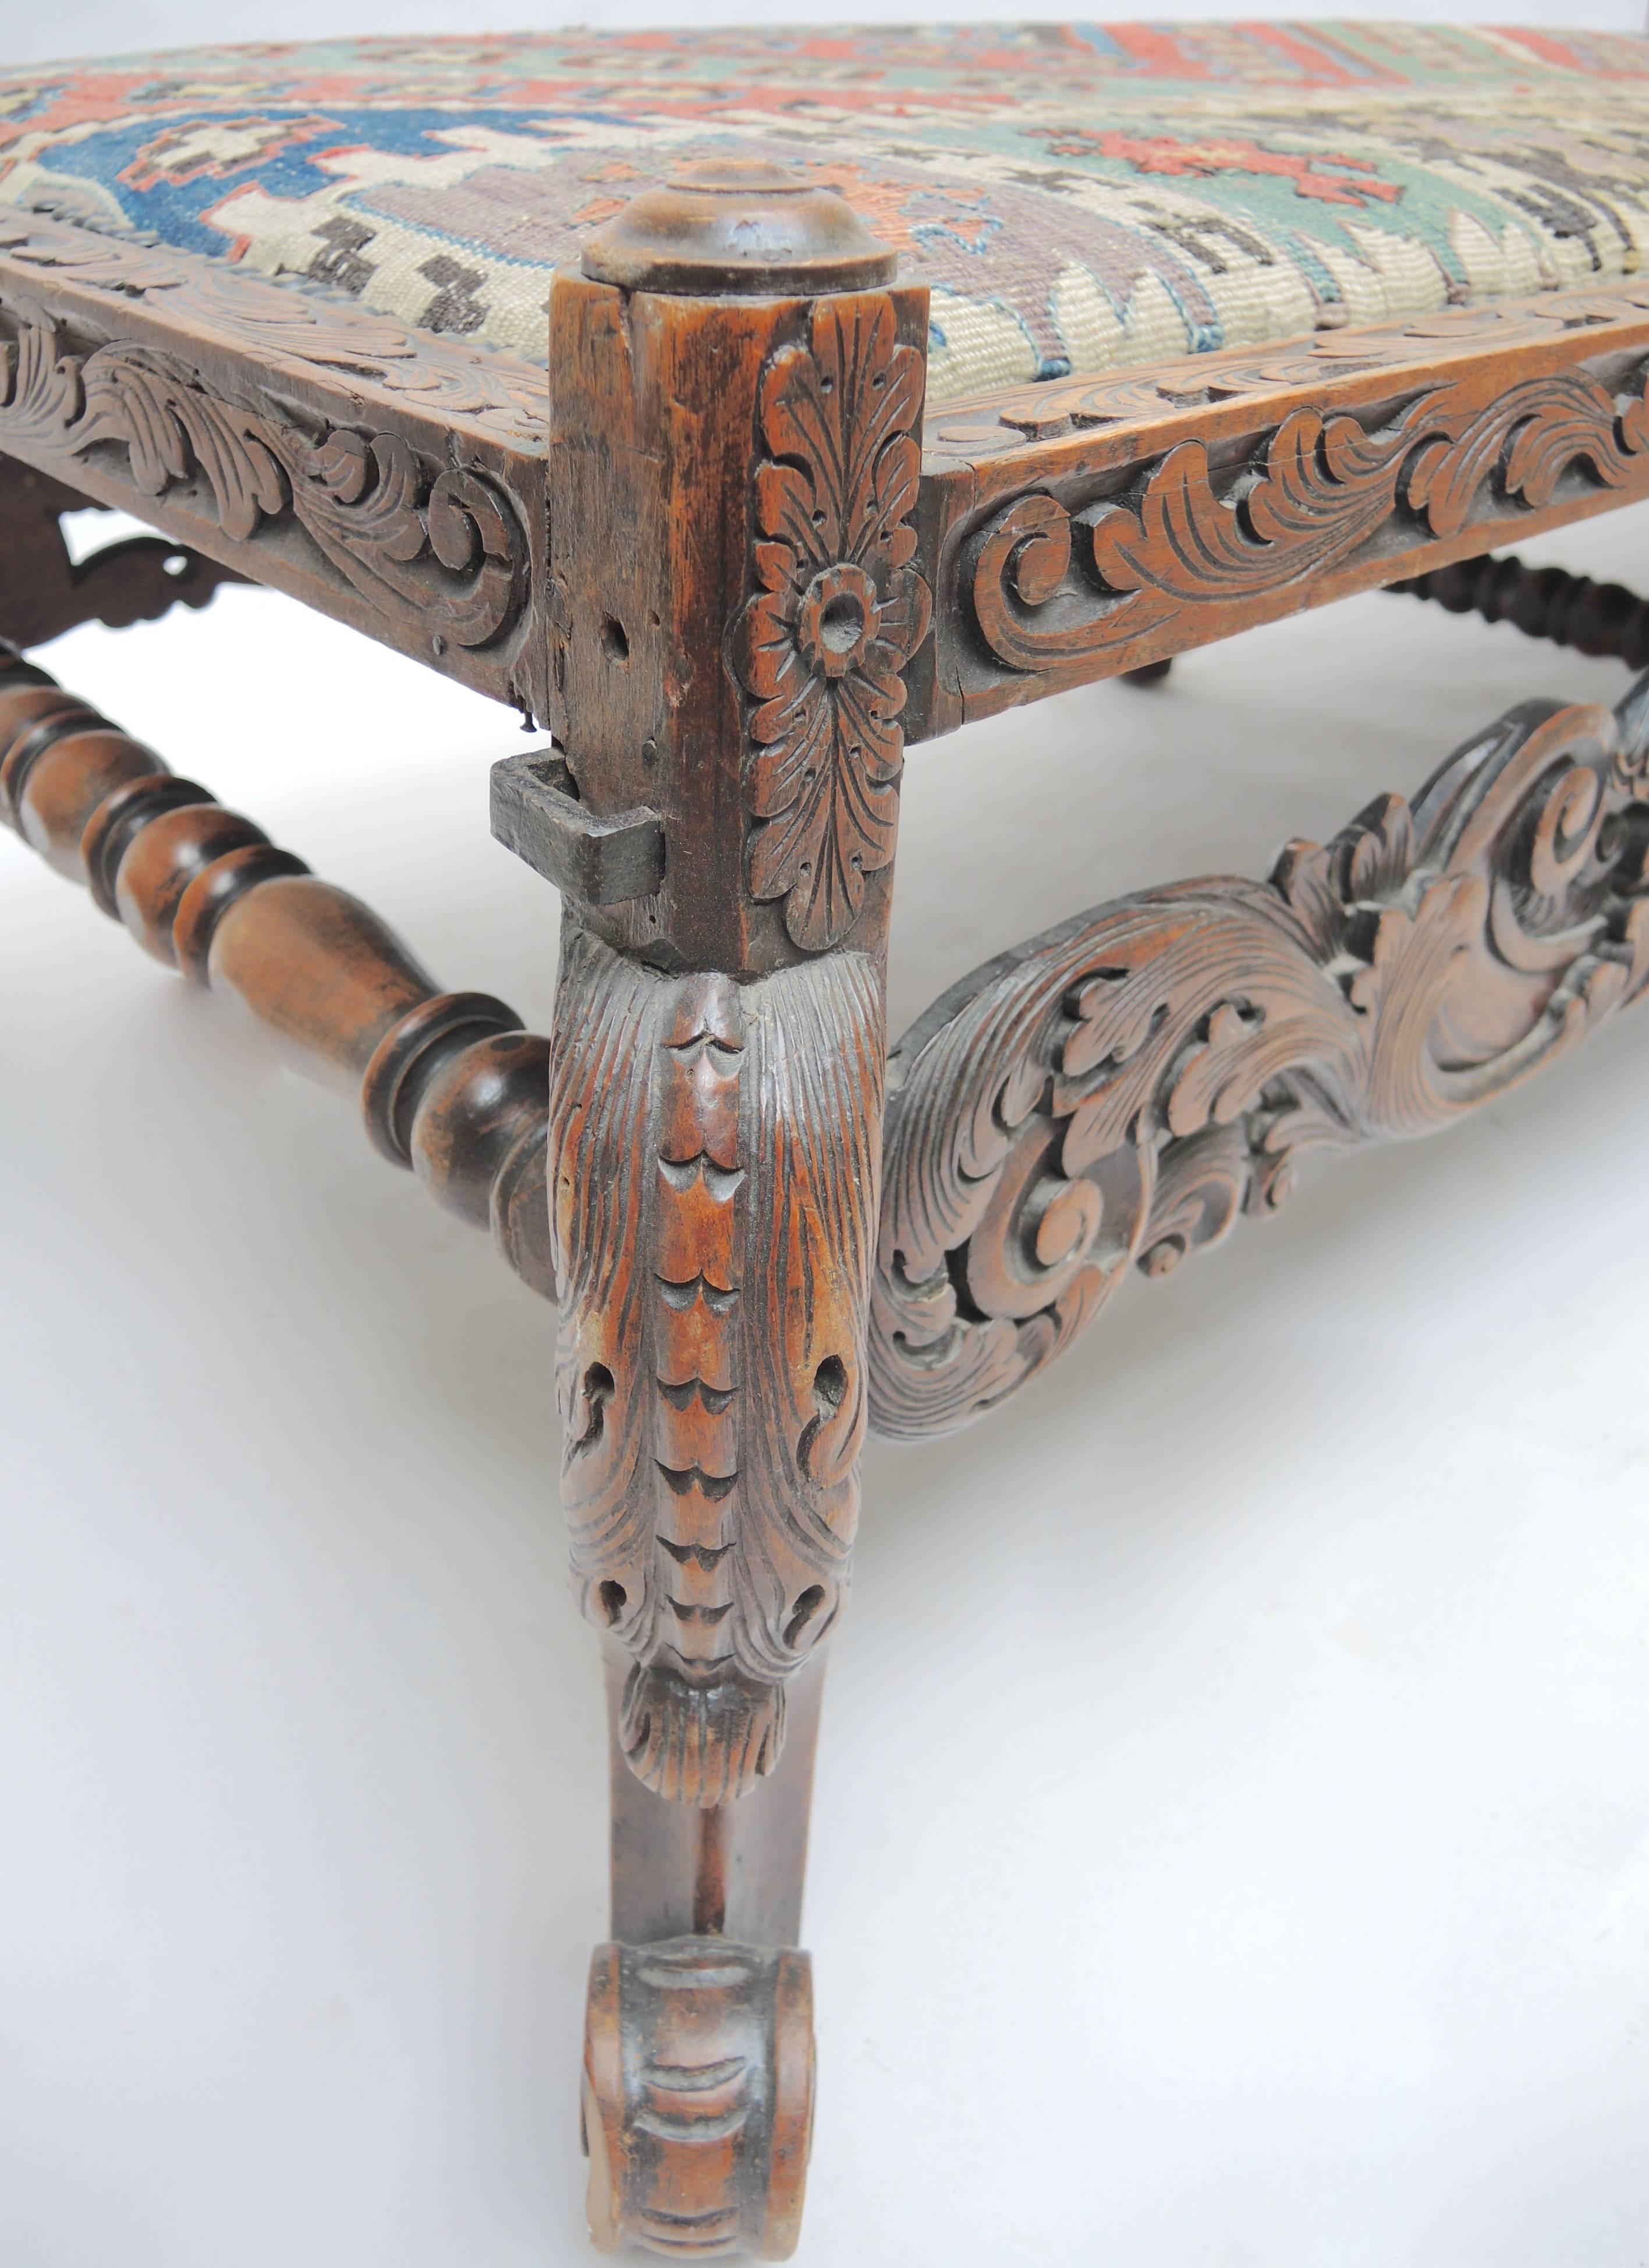 17th century Dutch Baroque carved oak bench upholstered in antique Kilim carpet and finished appropriately in brass nails. Originally used with a removable cane woven back (hand-wrought iron holders remain) this bench is the perfect height to use at